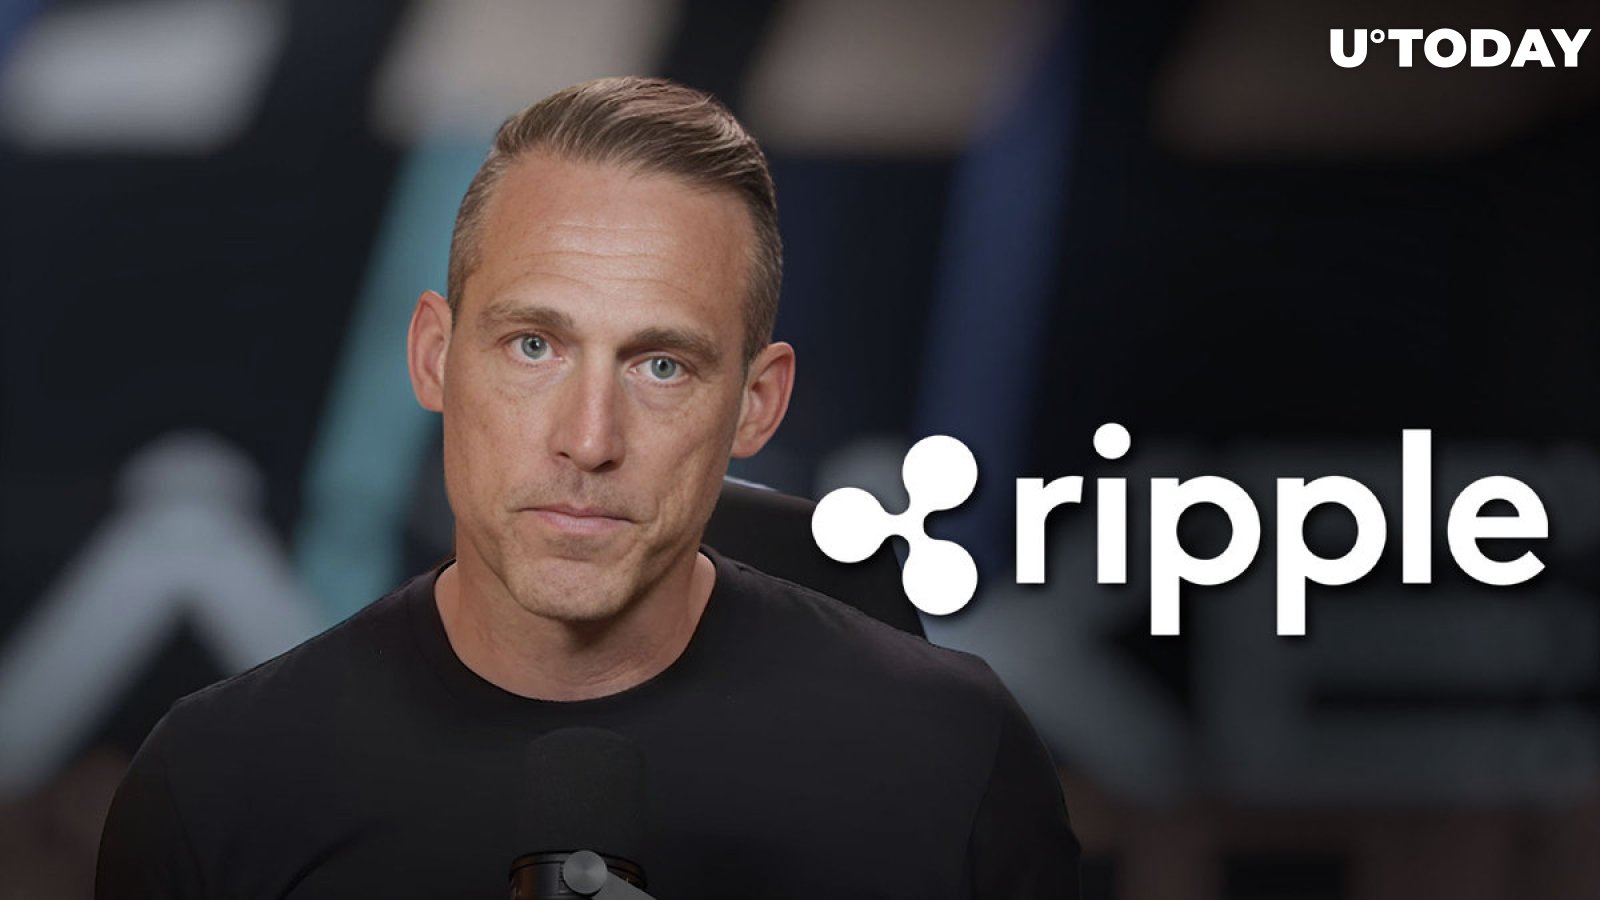 Ex-Ripple Exec Confronts YouTuber Mark Moss in Defense of XRP